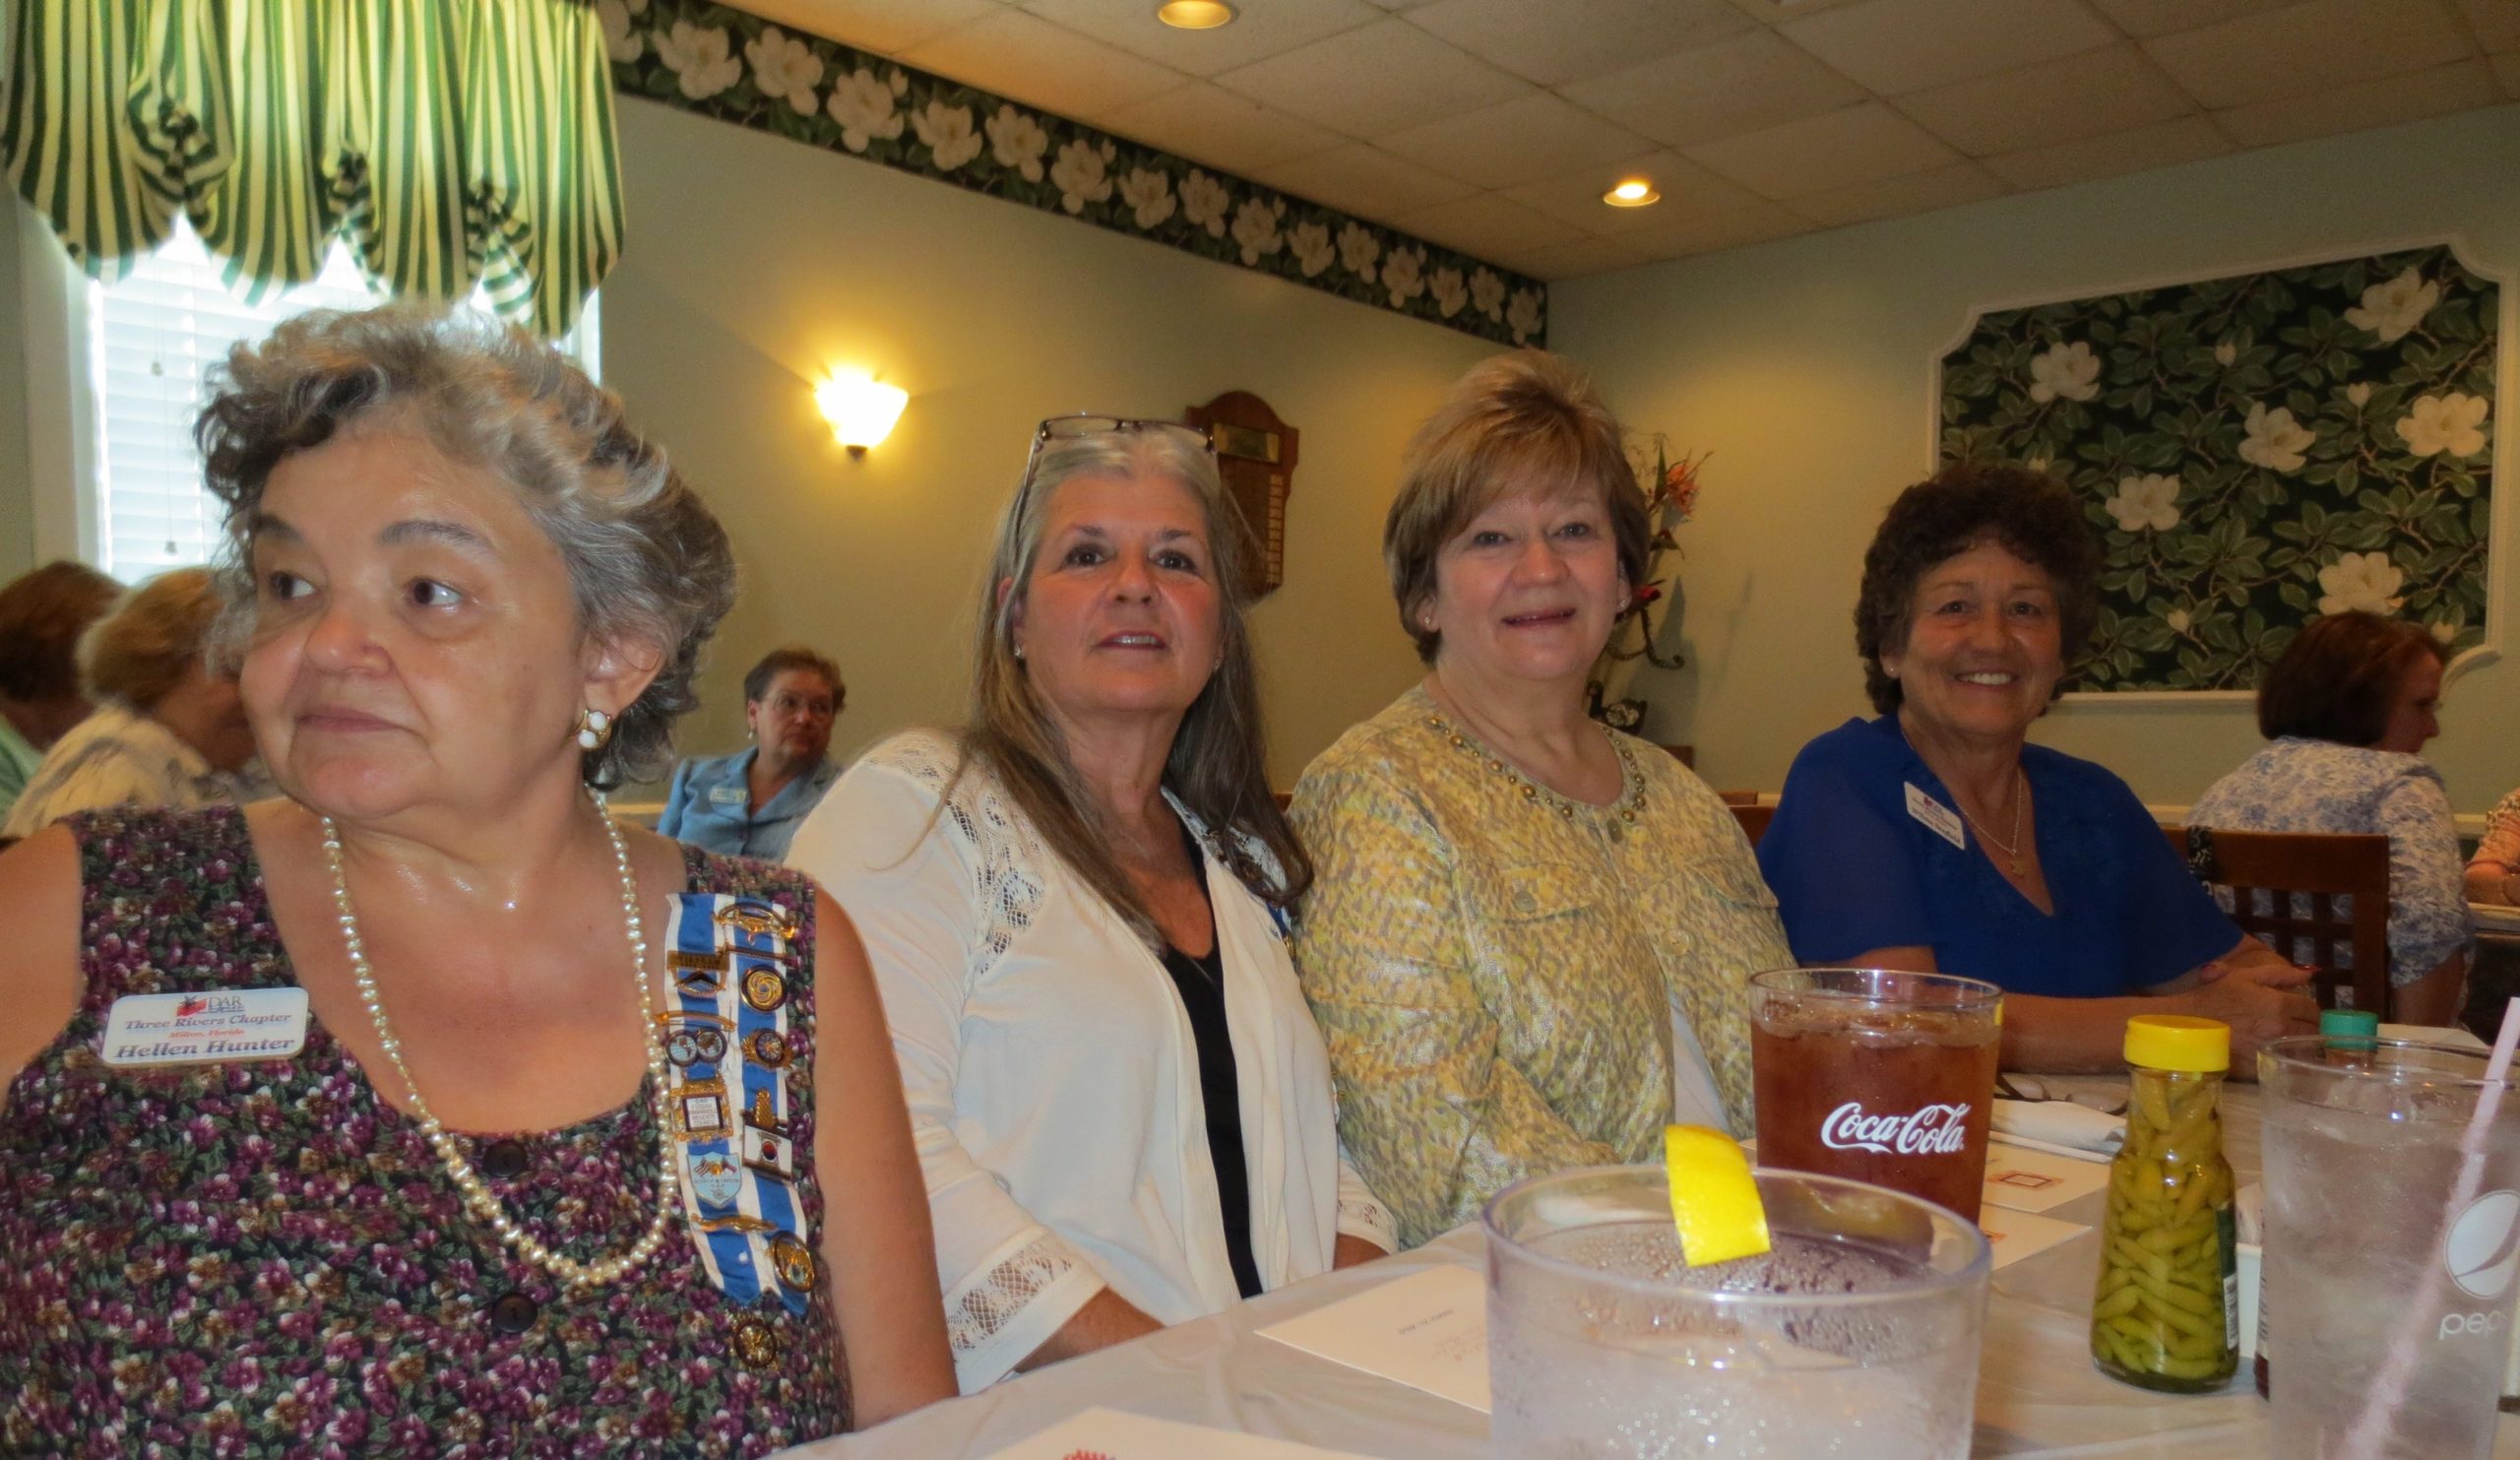 Three Rivers Chapters members: Hellen Hunter, Karen Young, Ann Smith and Wilma Scofield